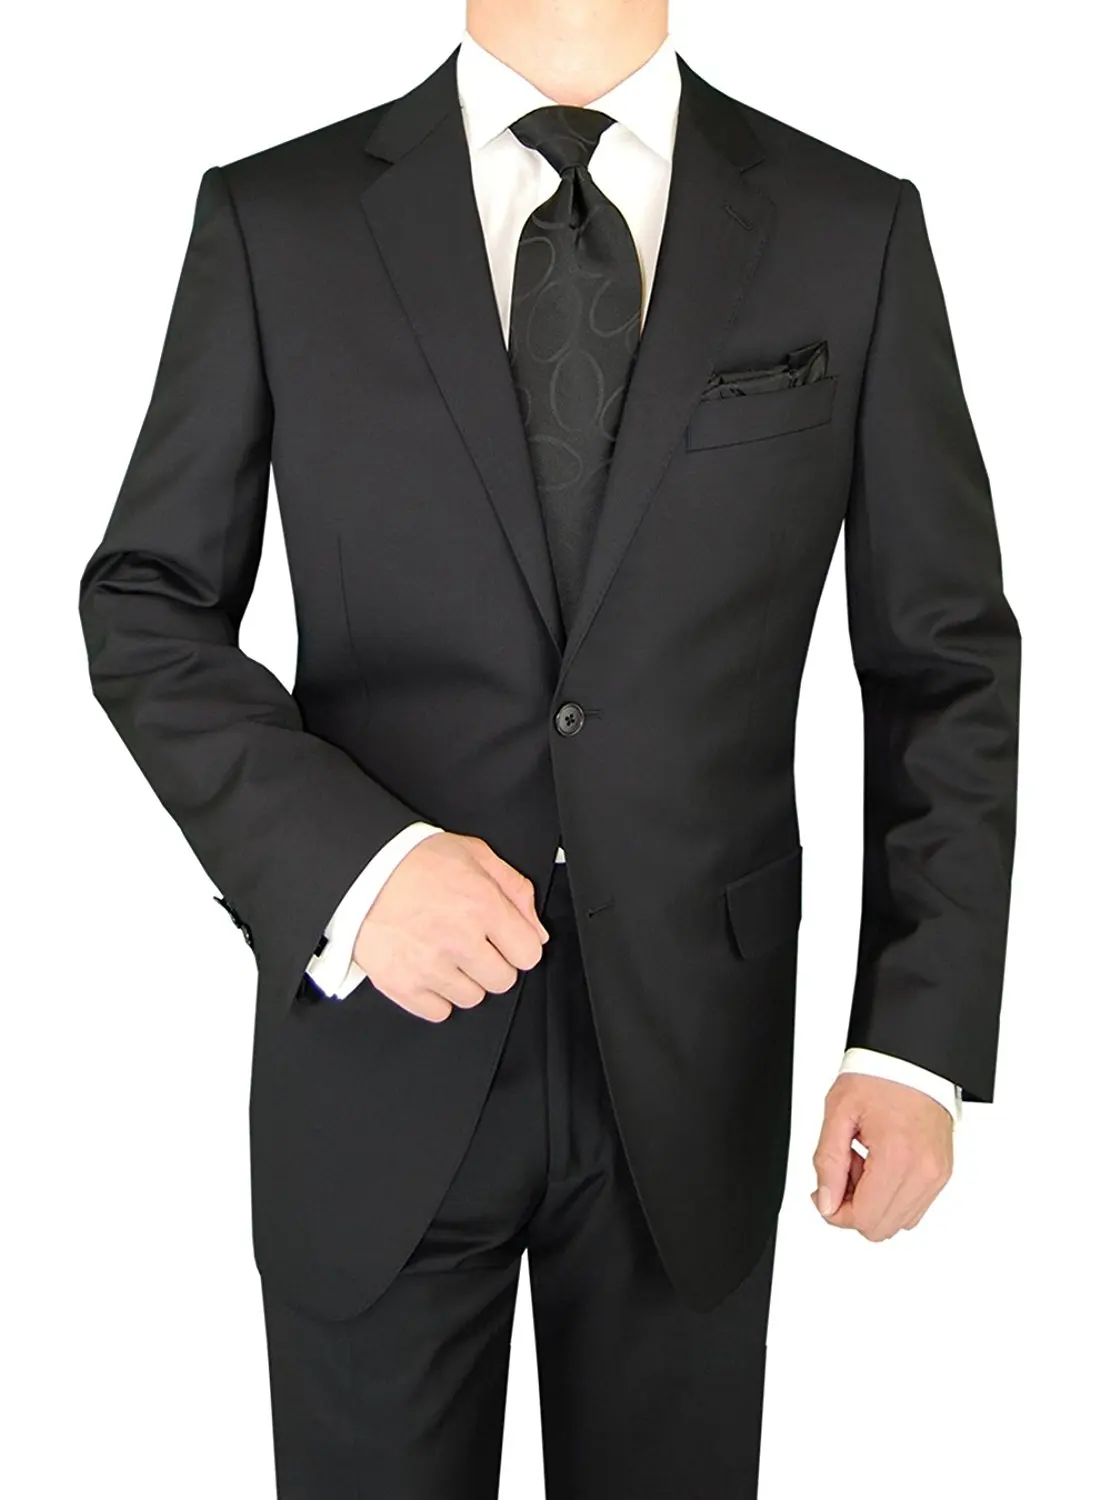 Cheap Canali Suit, find Canali Suit deals on line at Alibaba.com